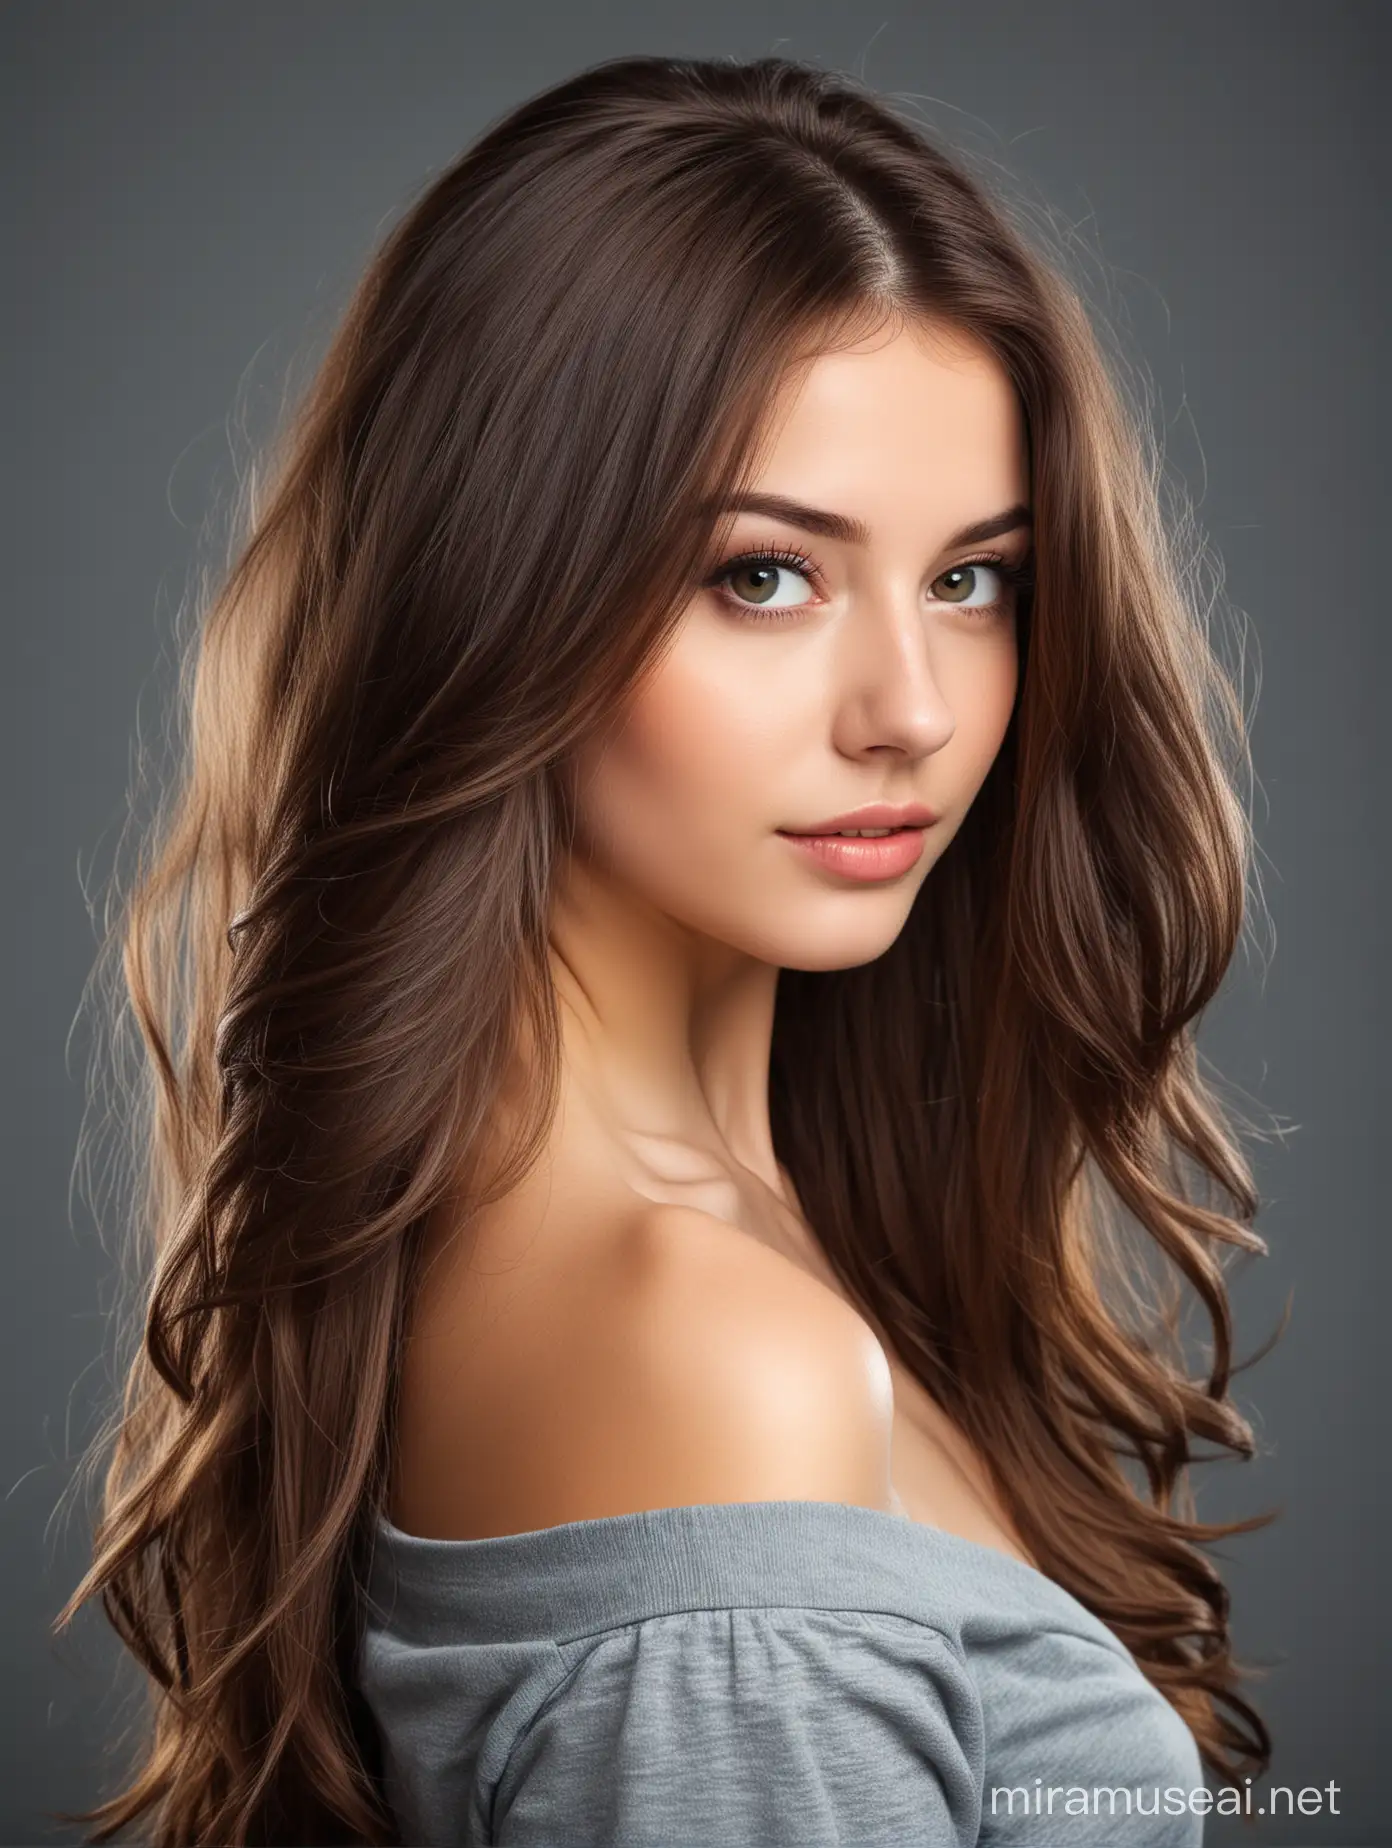 Portrait of a Beautiful Girl with Long Styled Hair